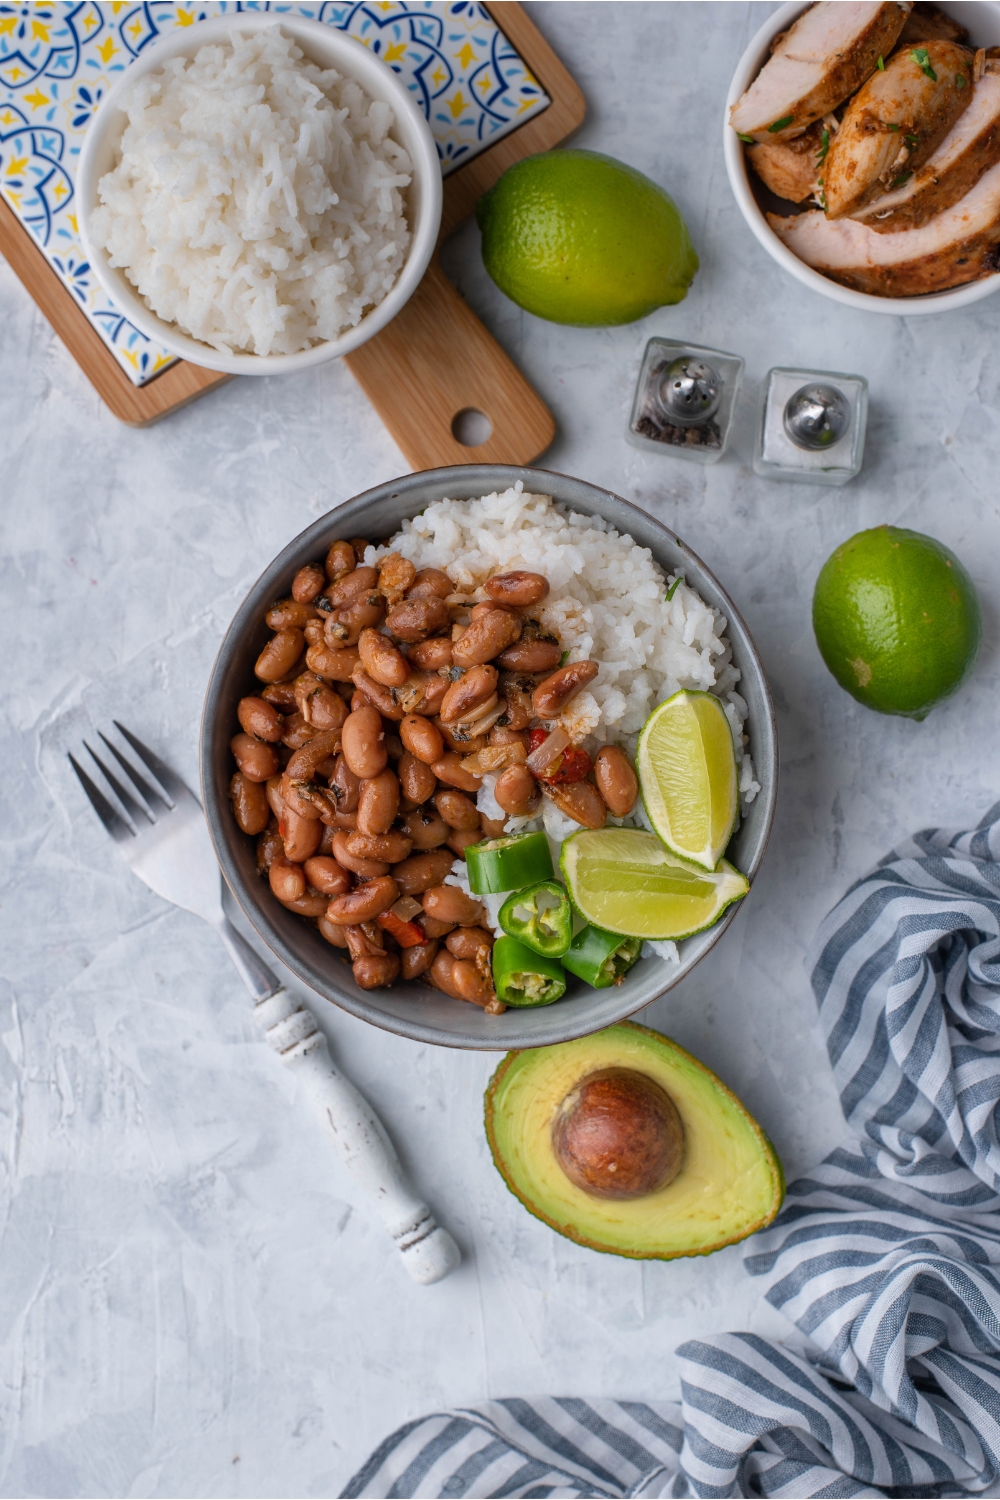 Overhead view of a bowl of pinto beans and white rice garnished with lime wedges and sliced peppers. The bowl is surrounded by a halved avocado, limes, a bowl of white rice, a fork, salt and pepper shakers, and sliced meat.